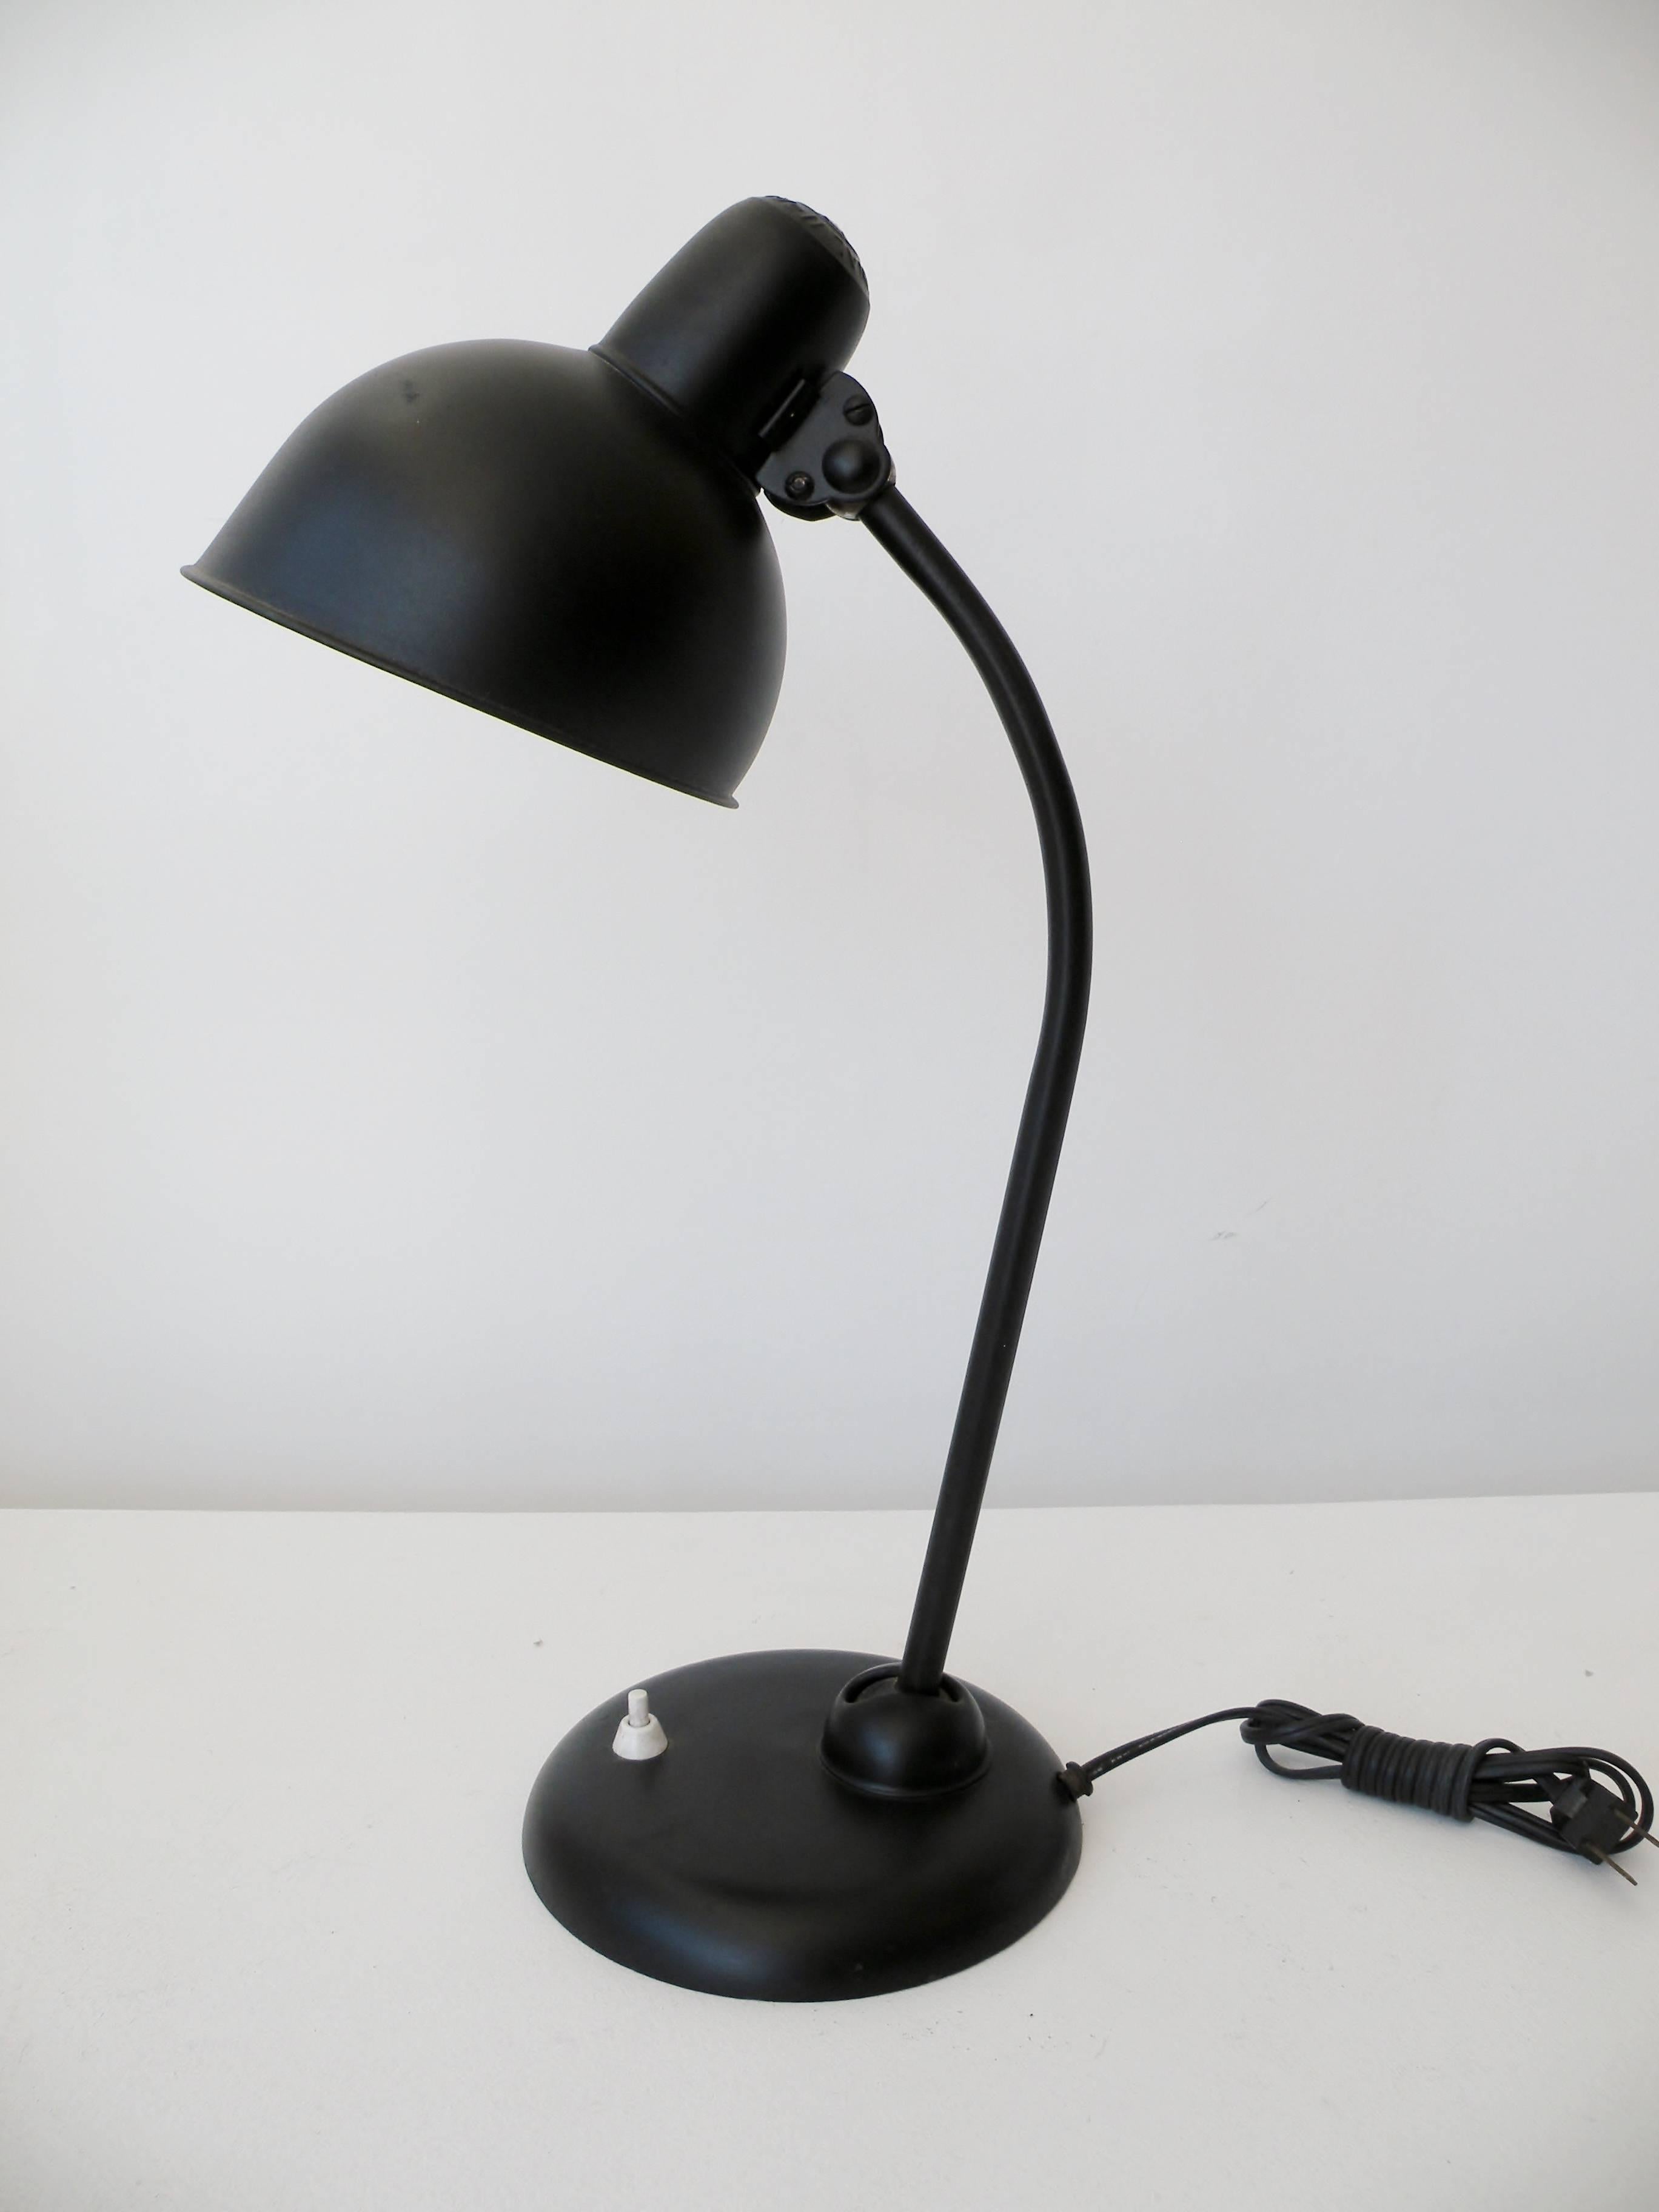 Christian Dell designed adjustable desk lamp for Kaiser Dell while at the Bauhaus. A classic design made in Germany with an old repaint restoration.